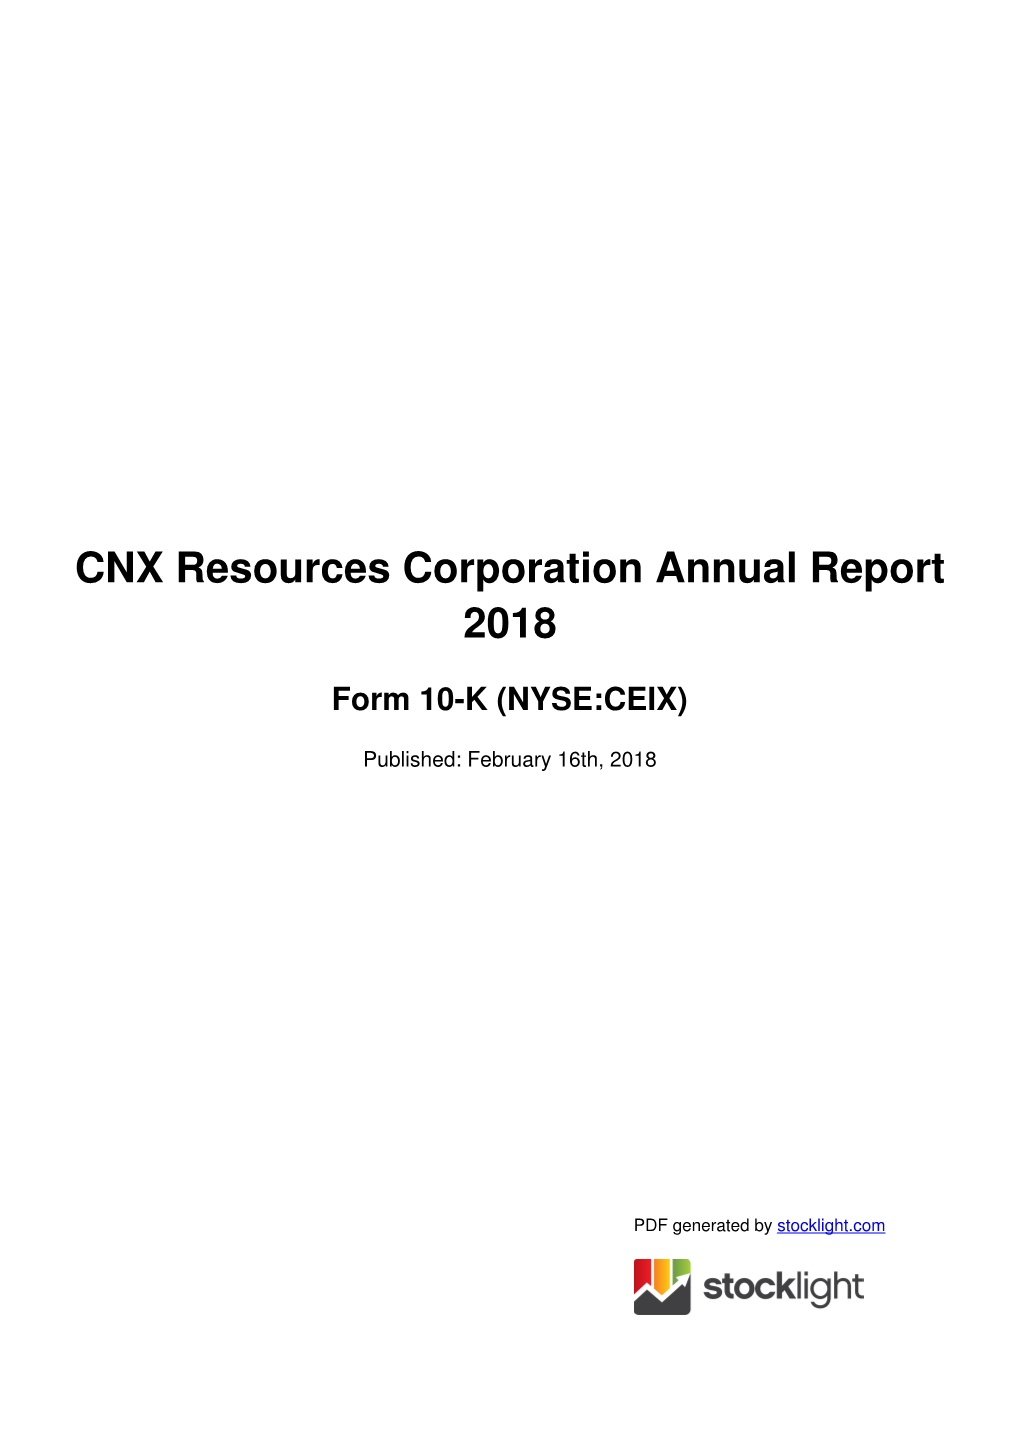 CNX Resources Corporation Annual Report 2018